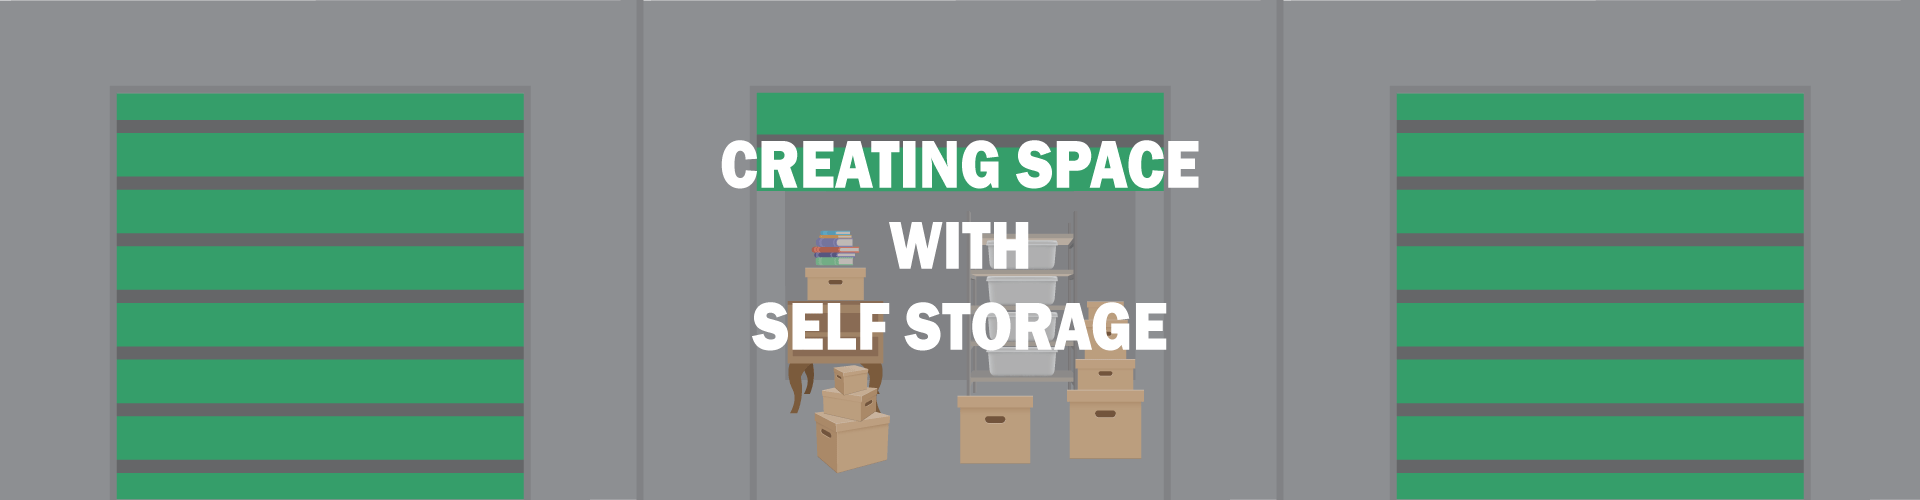 create space with Moose Crossing Self Storage in Machesney Park, IL